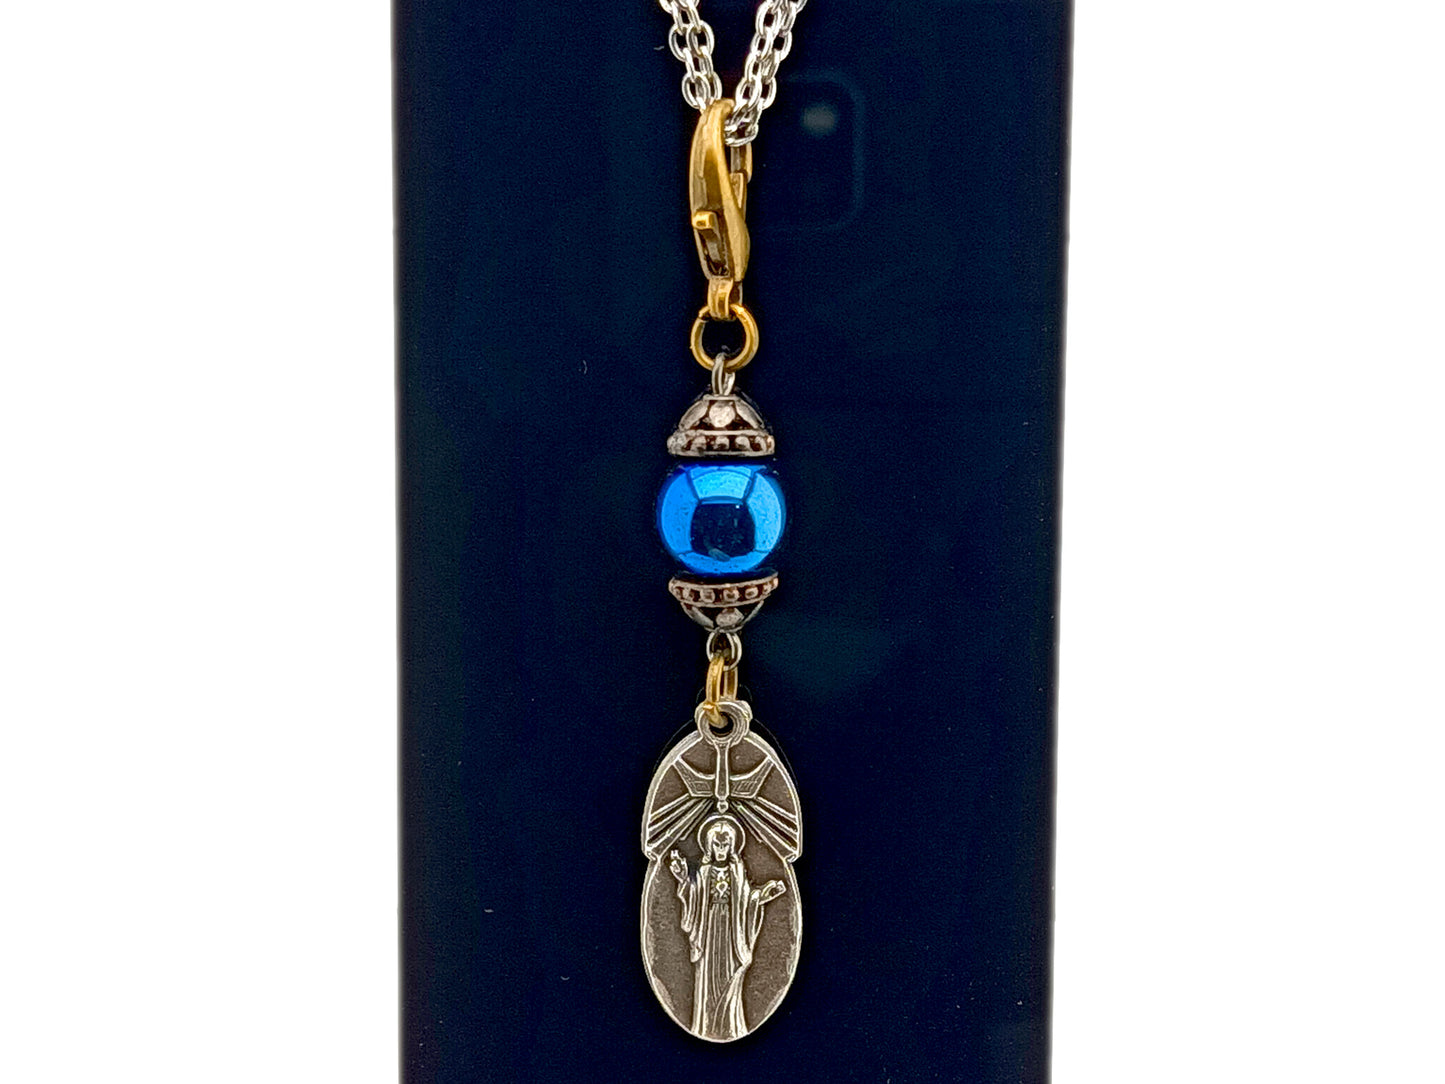 Sacred Heart and Our Lady of Mount Carmel unique rosary beads purse clip keychain with blue hematite gemstone bead and brass 6mm lobster clasp.